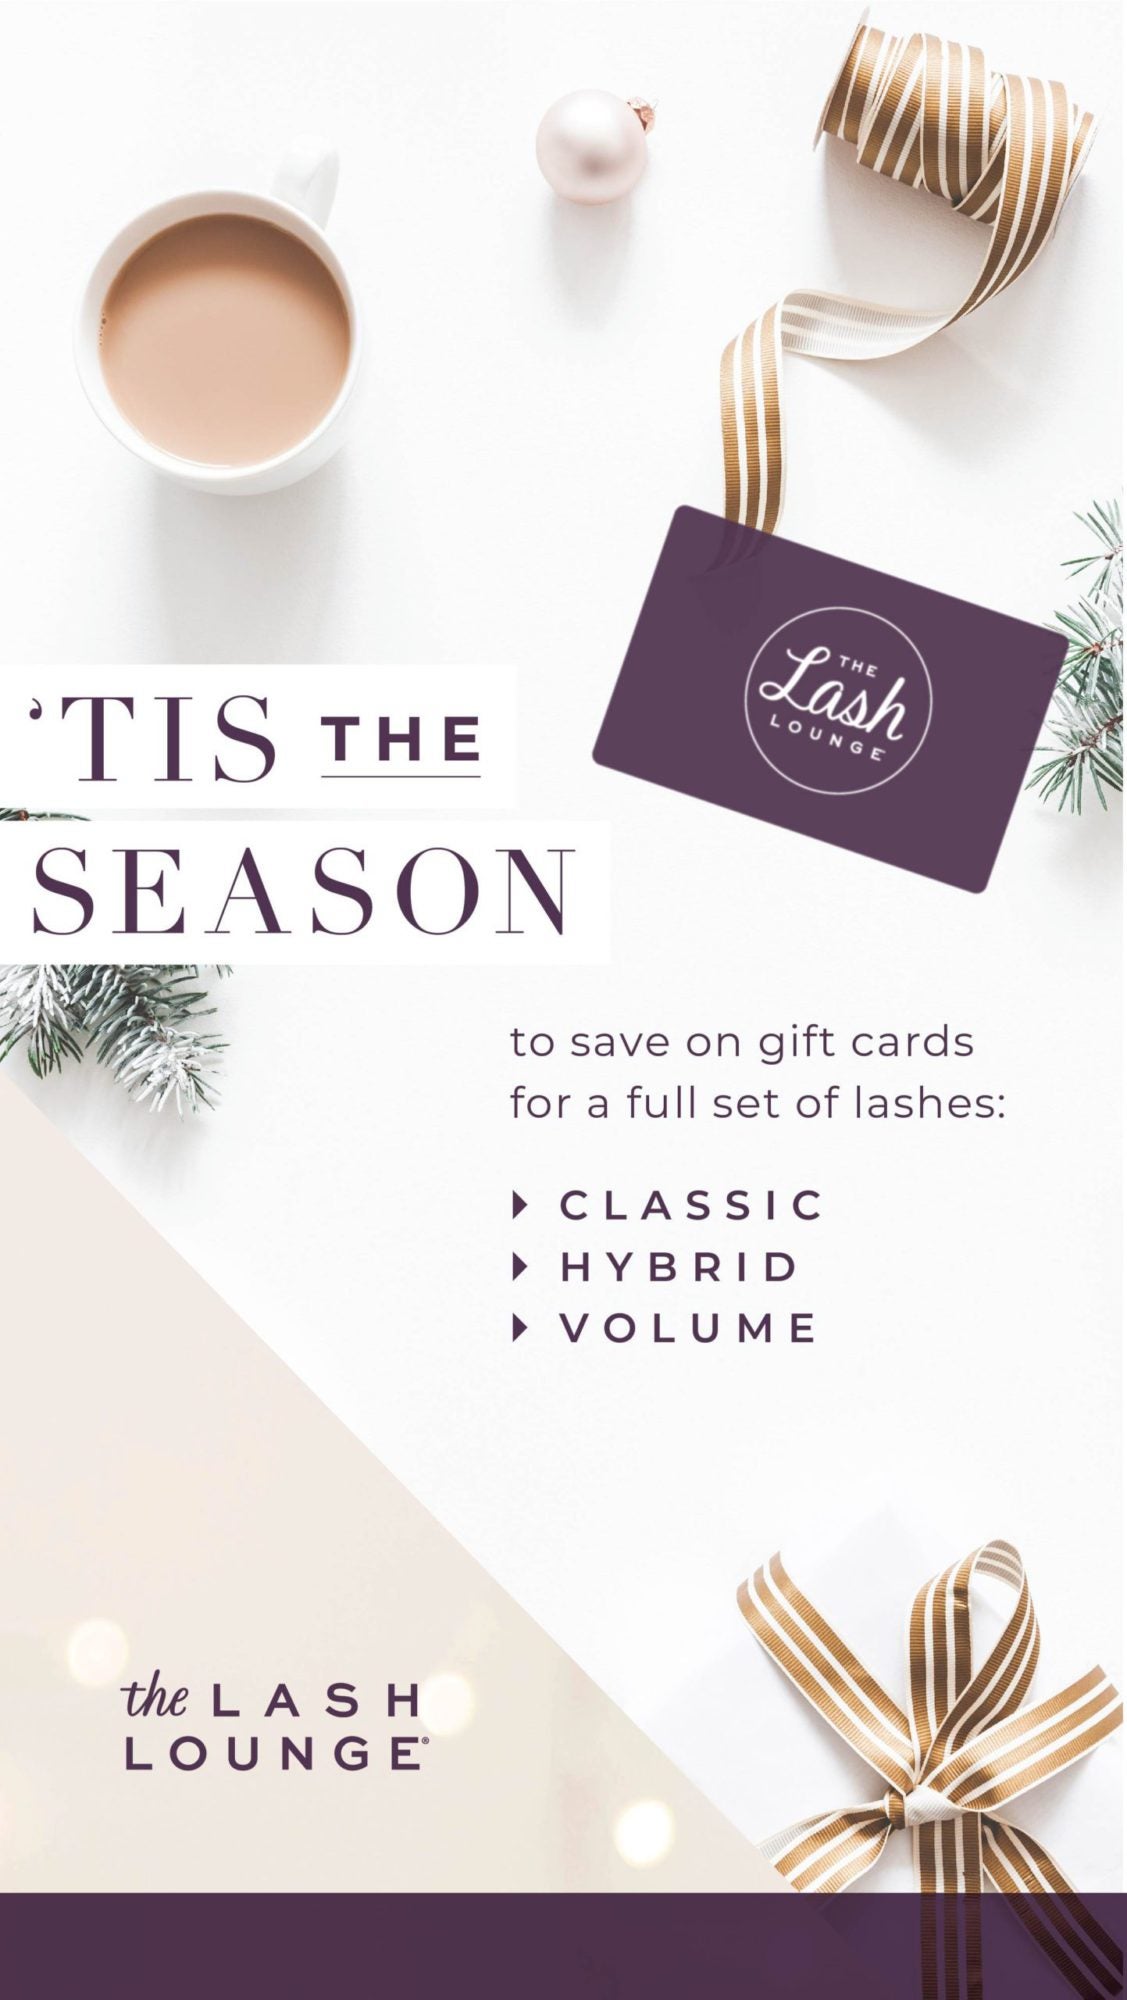 Gift Card from The Lash Lounge for holiday stocking stuffer